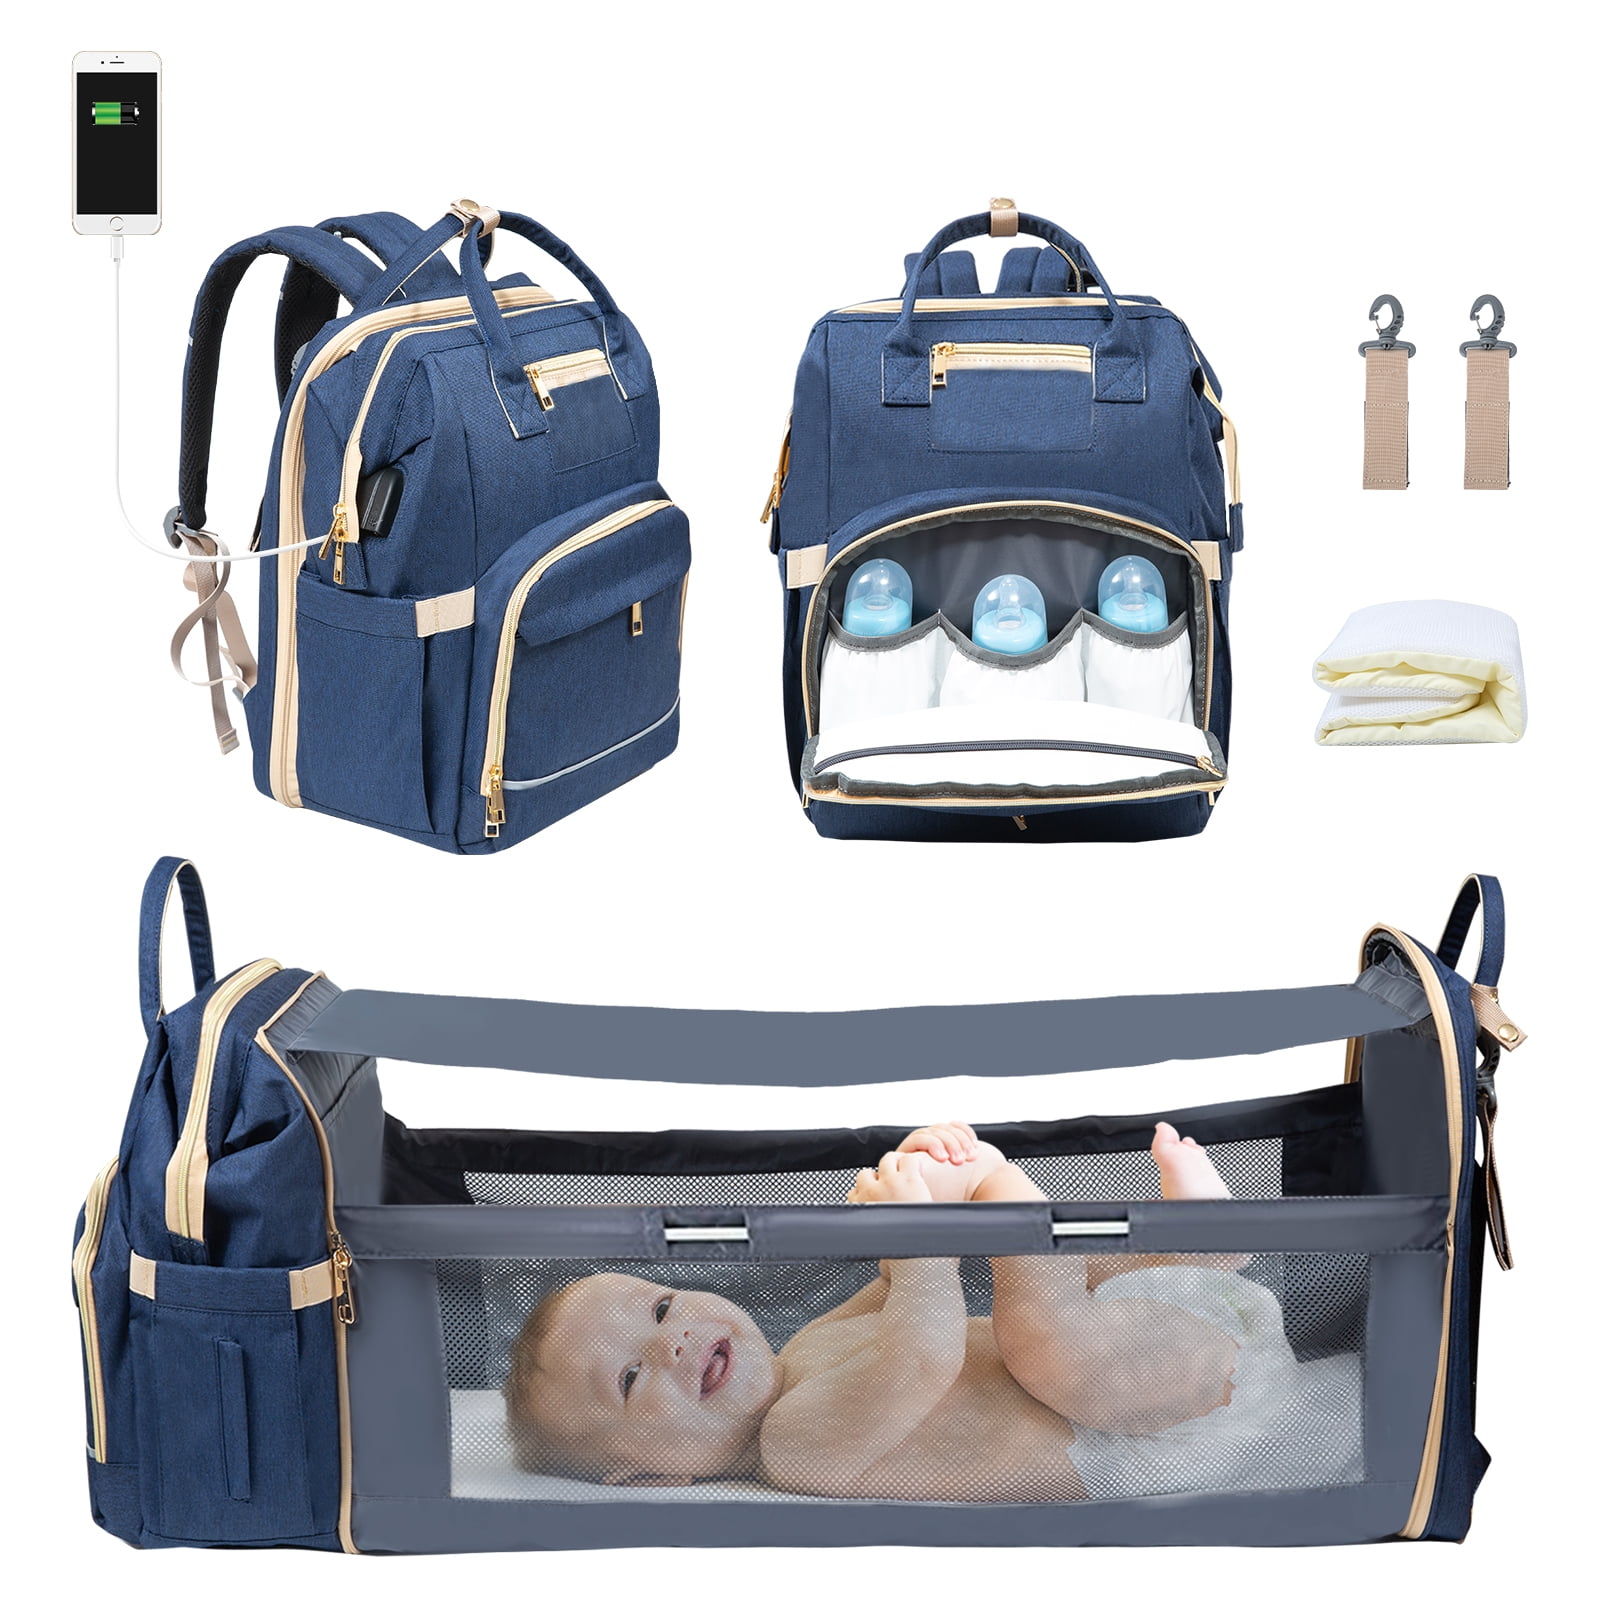 WiseWater Diaper Bag Backpack with Changing Station, Unisex Baby Travel  Nappy Bags with Portable Crib, Blue - Walmart.com